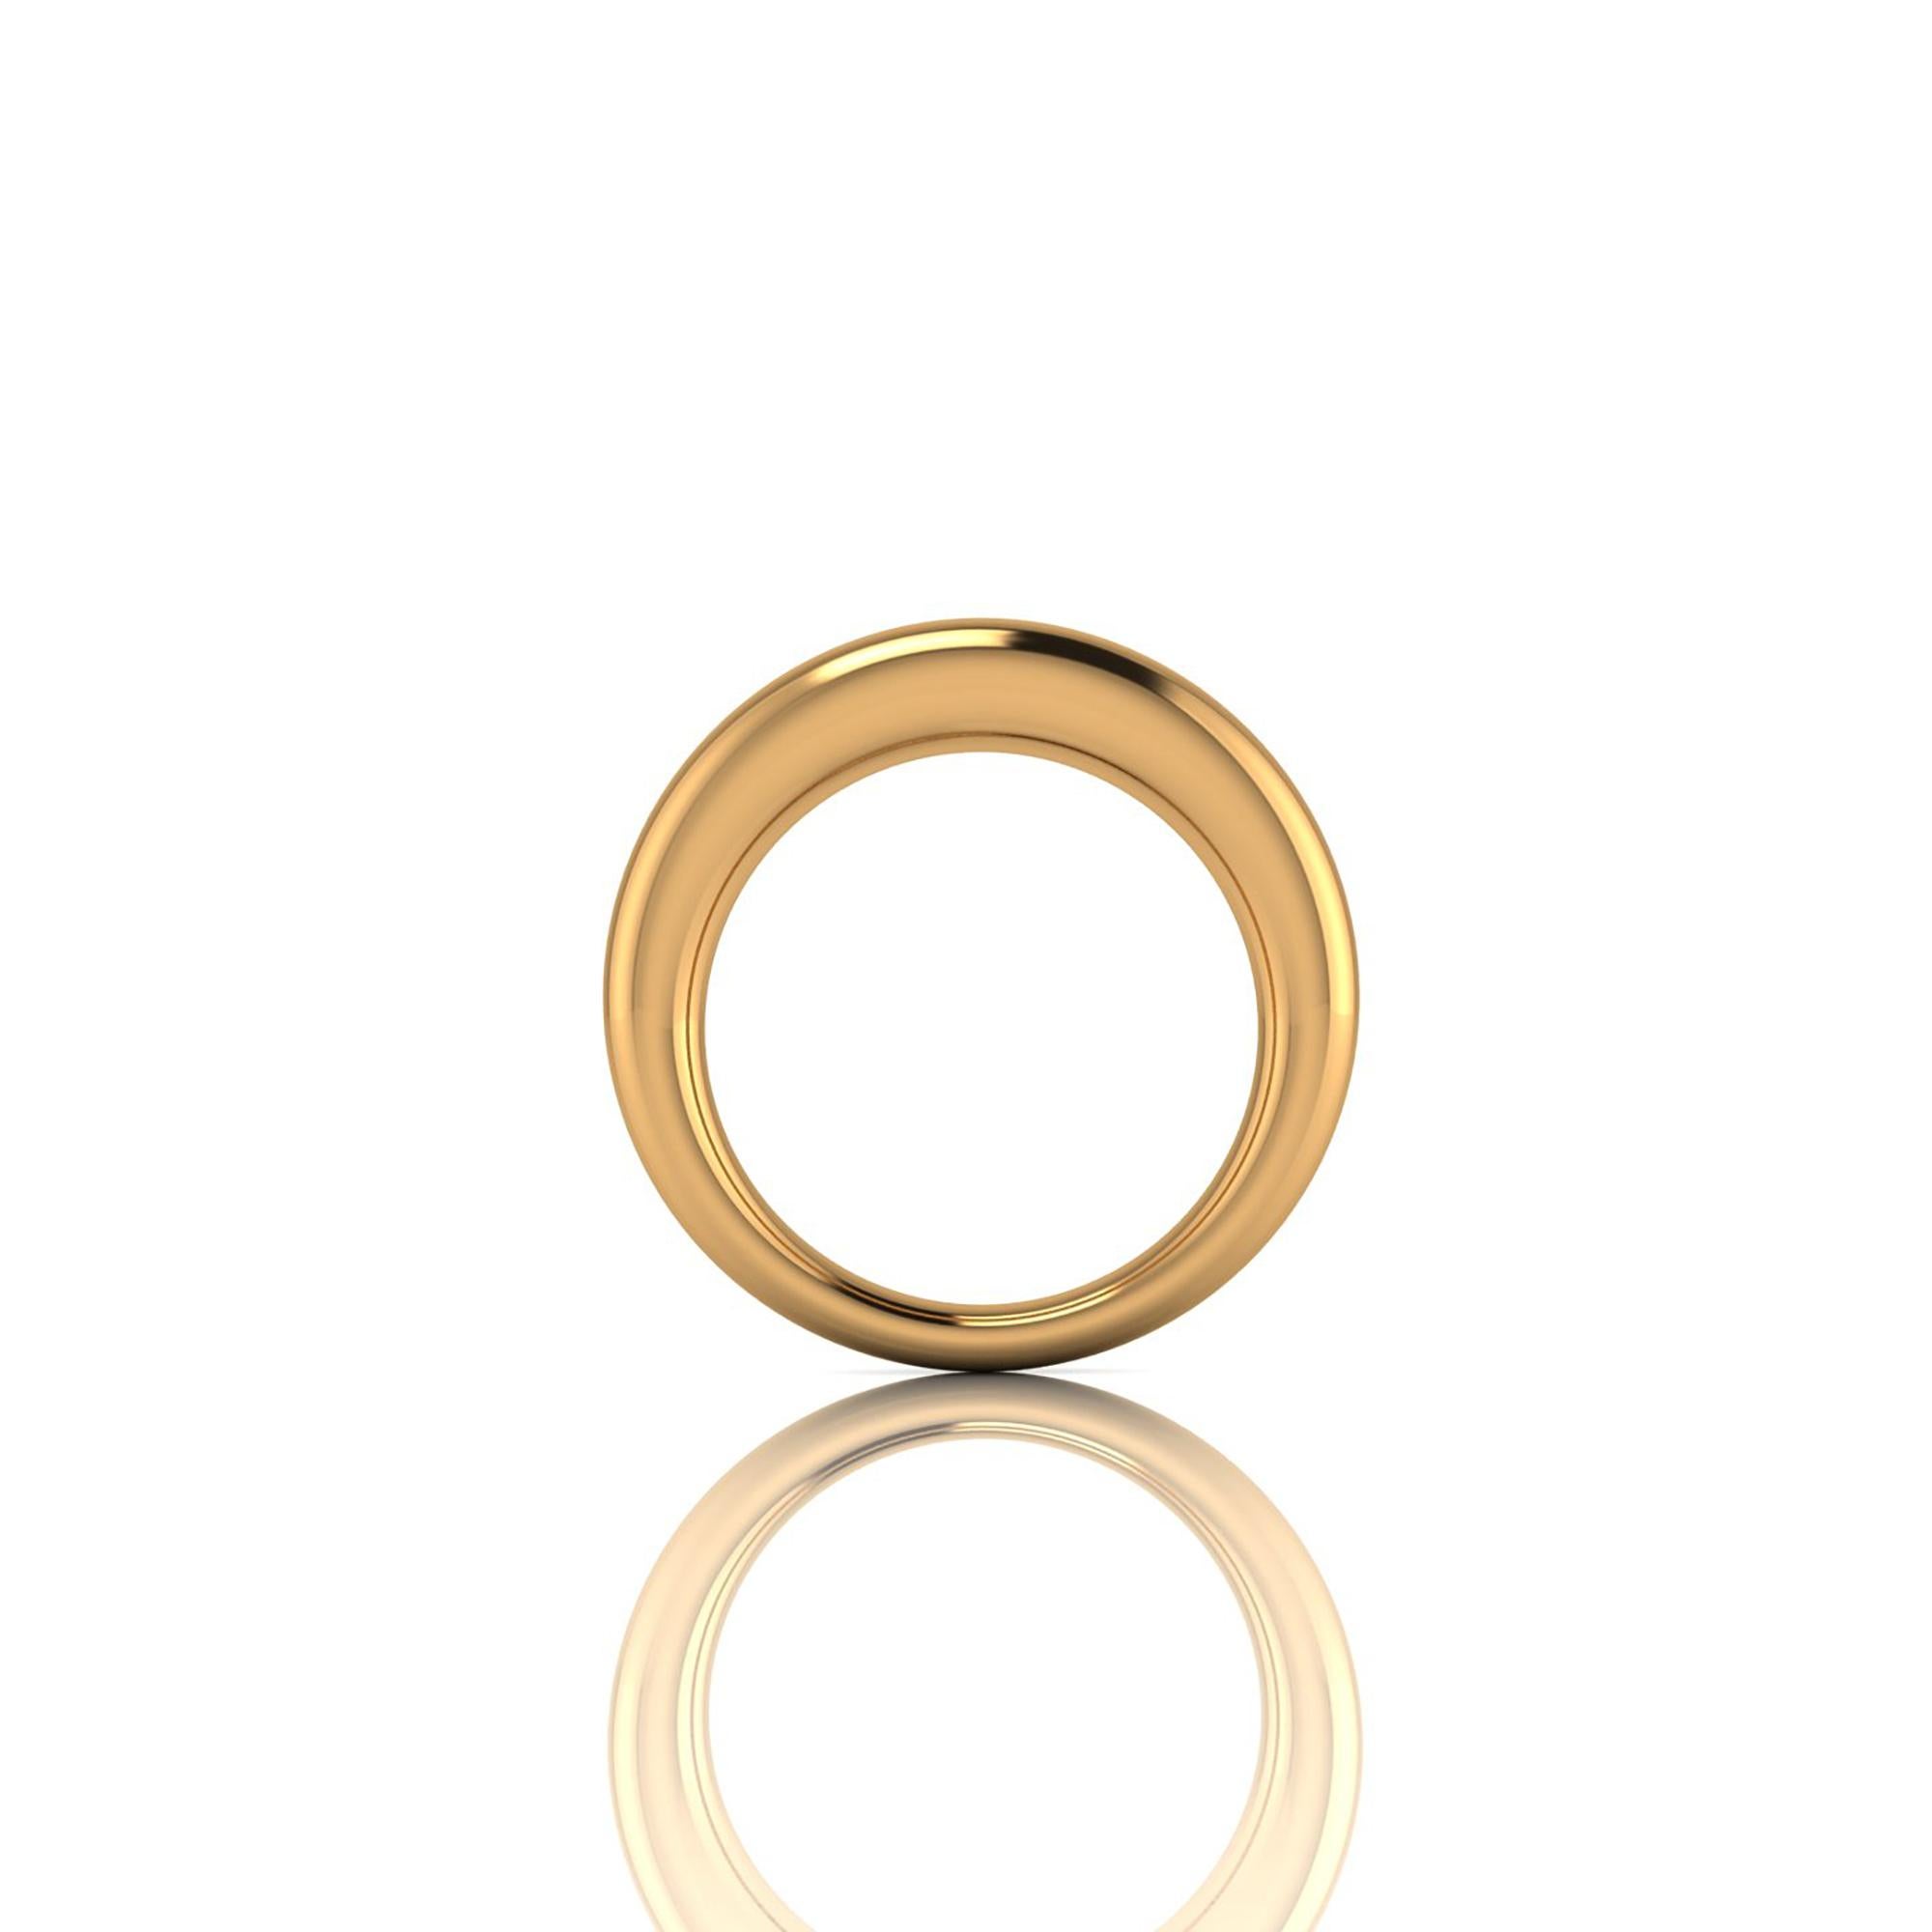 Solid 18k gold rounded band, tapered at the bottom, round profile for maximum comfort fit, bold and model design, being solid gold it gives you the rich weight of a solid piece of jewelry.
Size 6, complimentary sizing upon order before shipping.